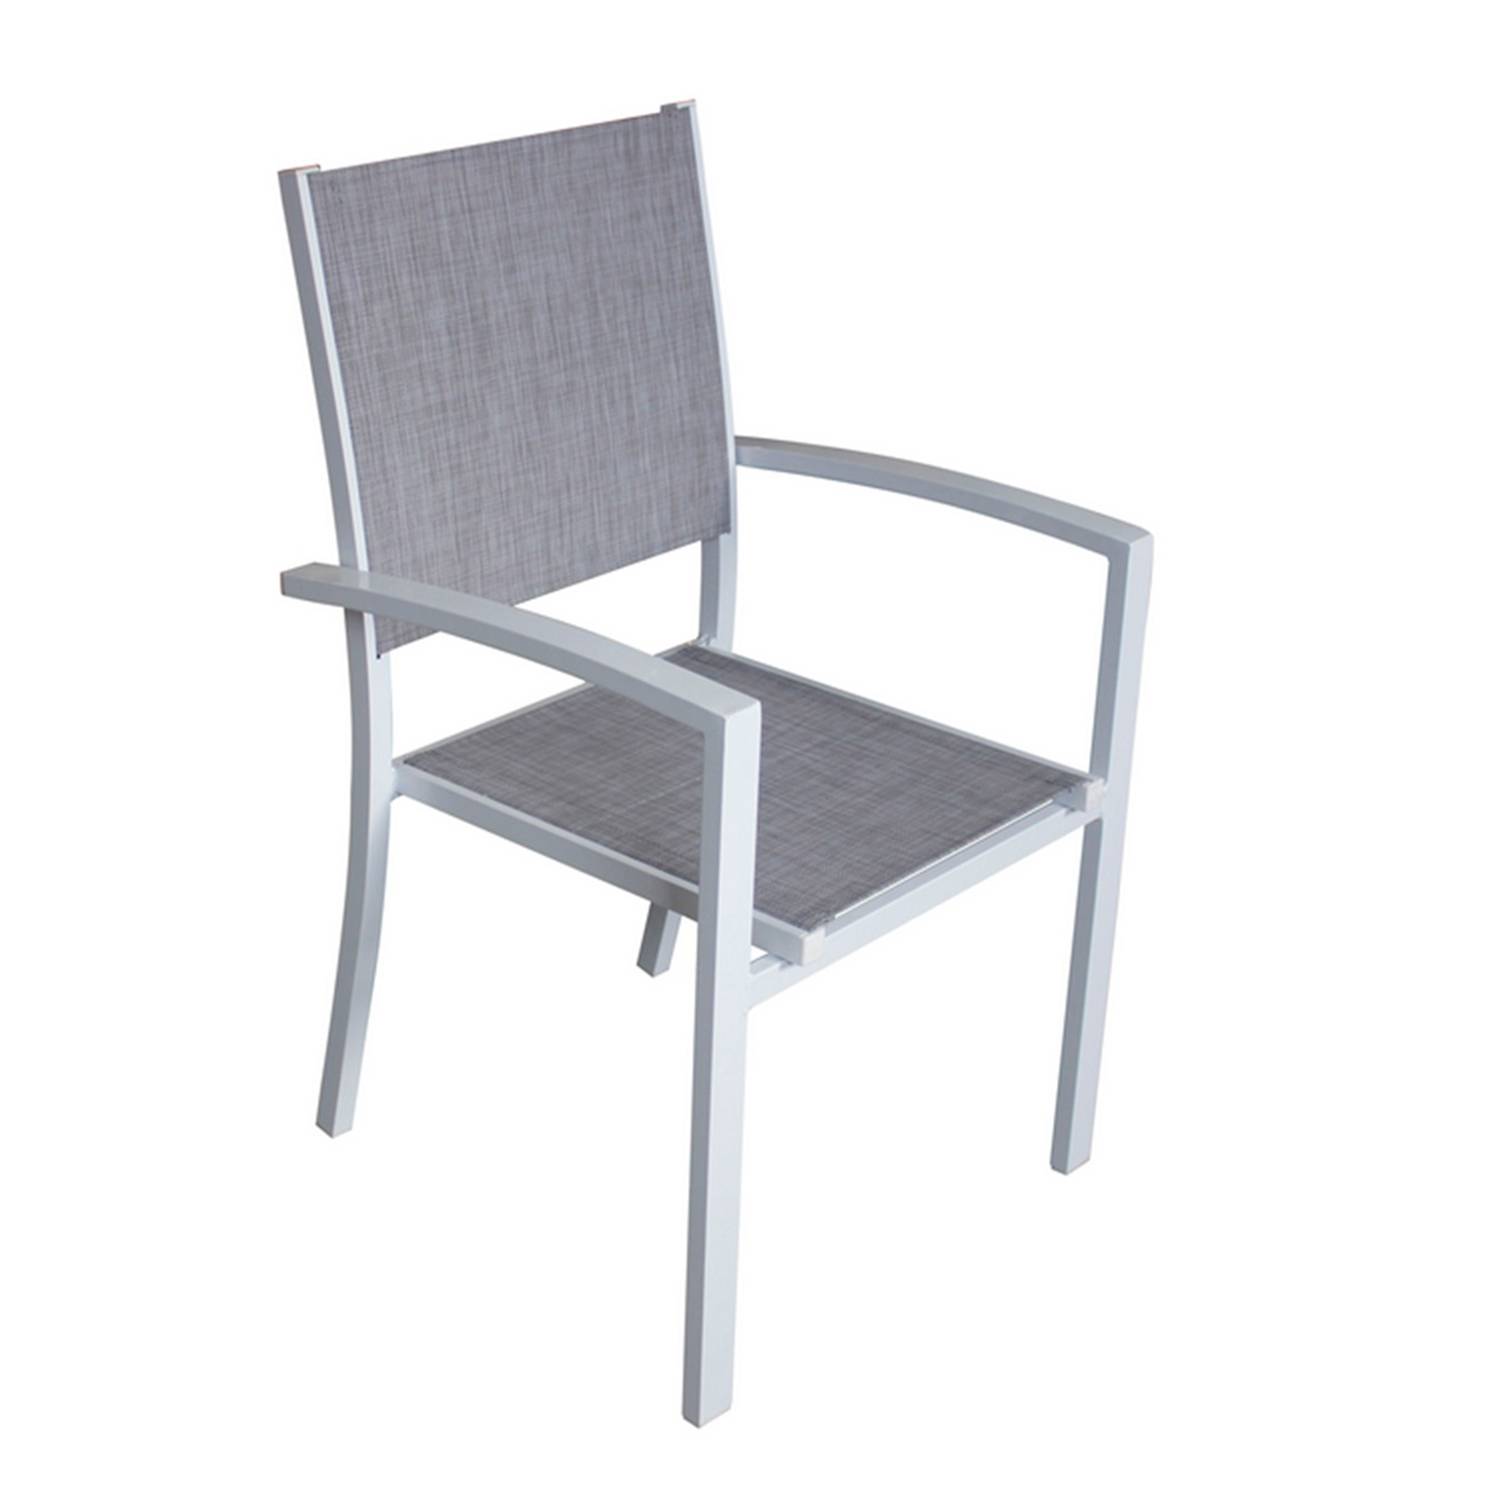 Aluminium Office Dinning chair living room chair outdoor chairs